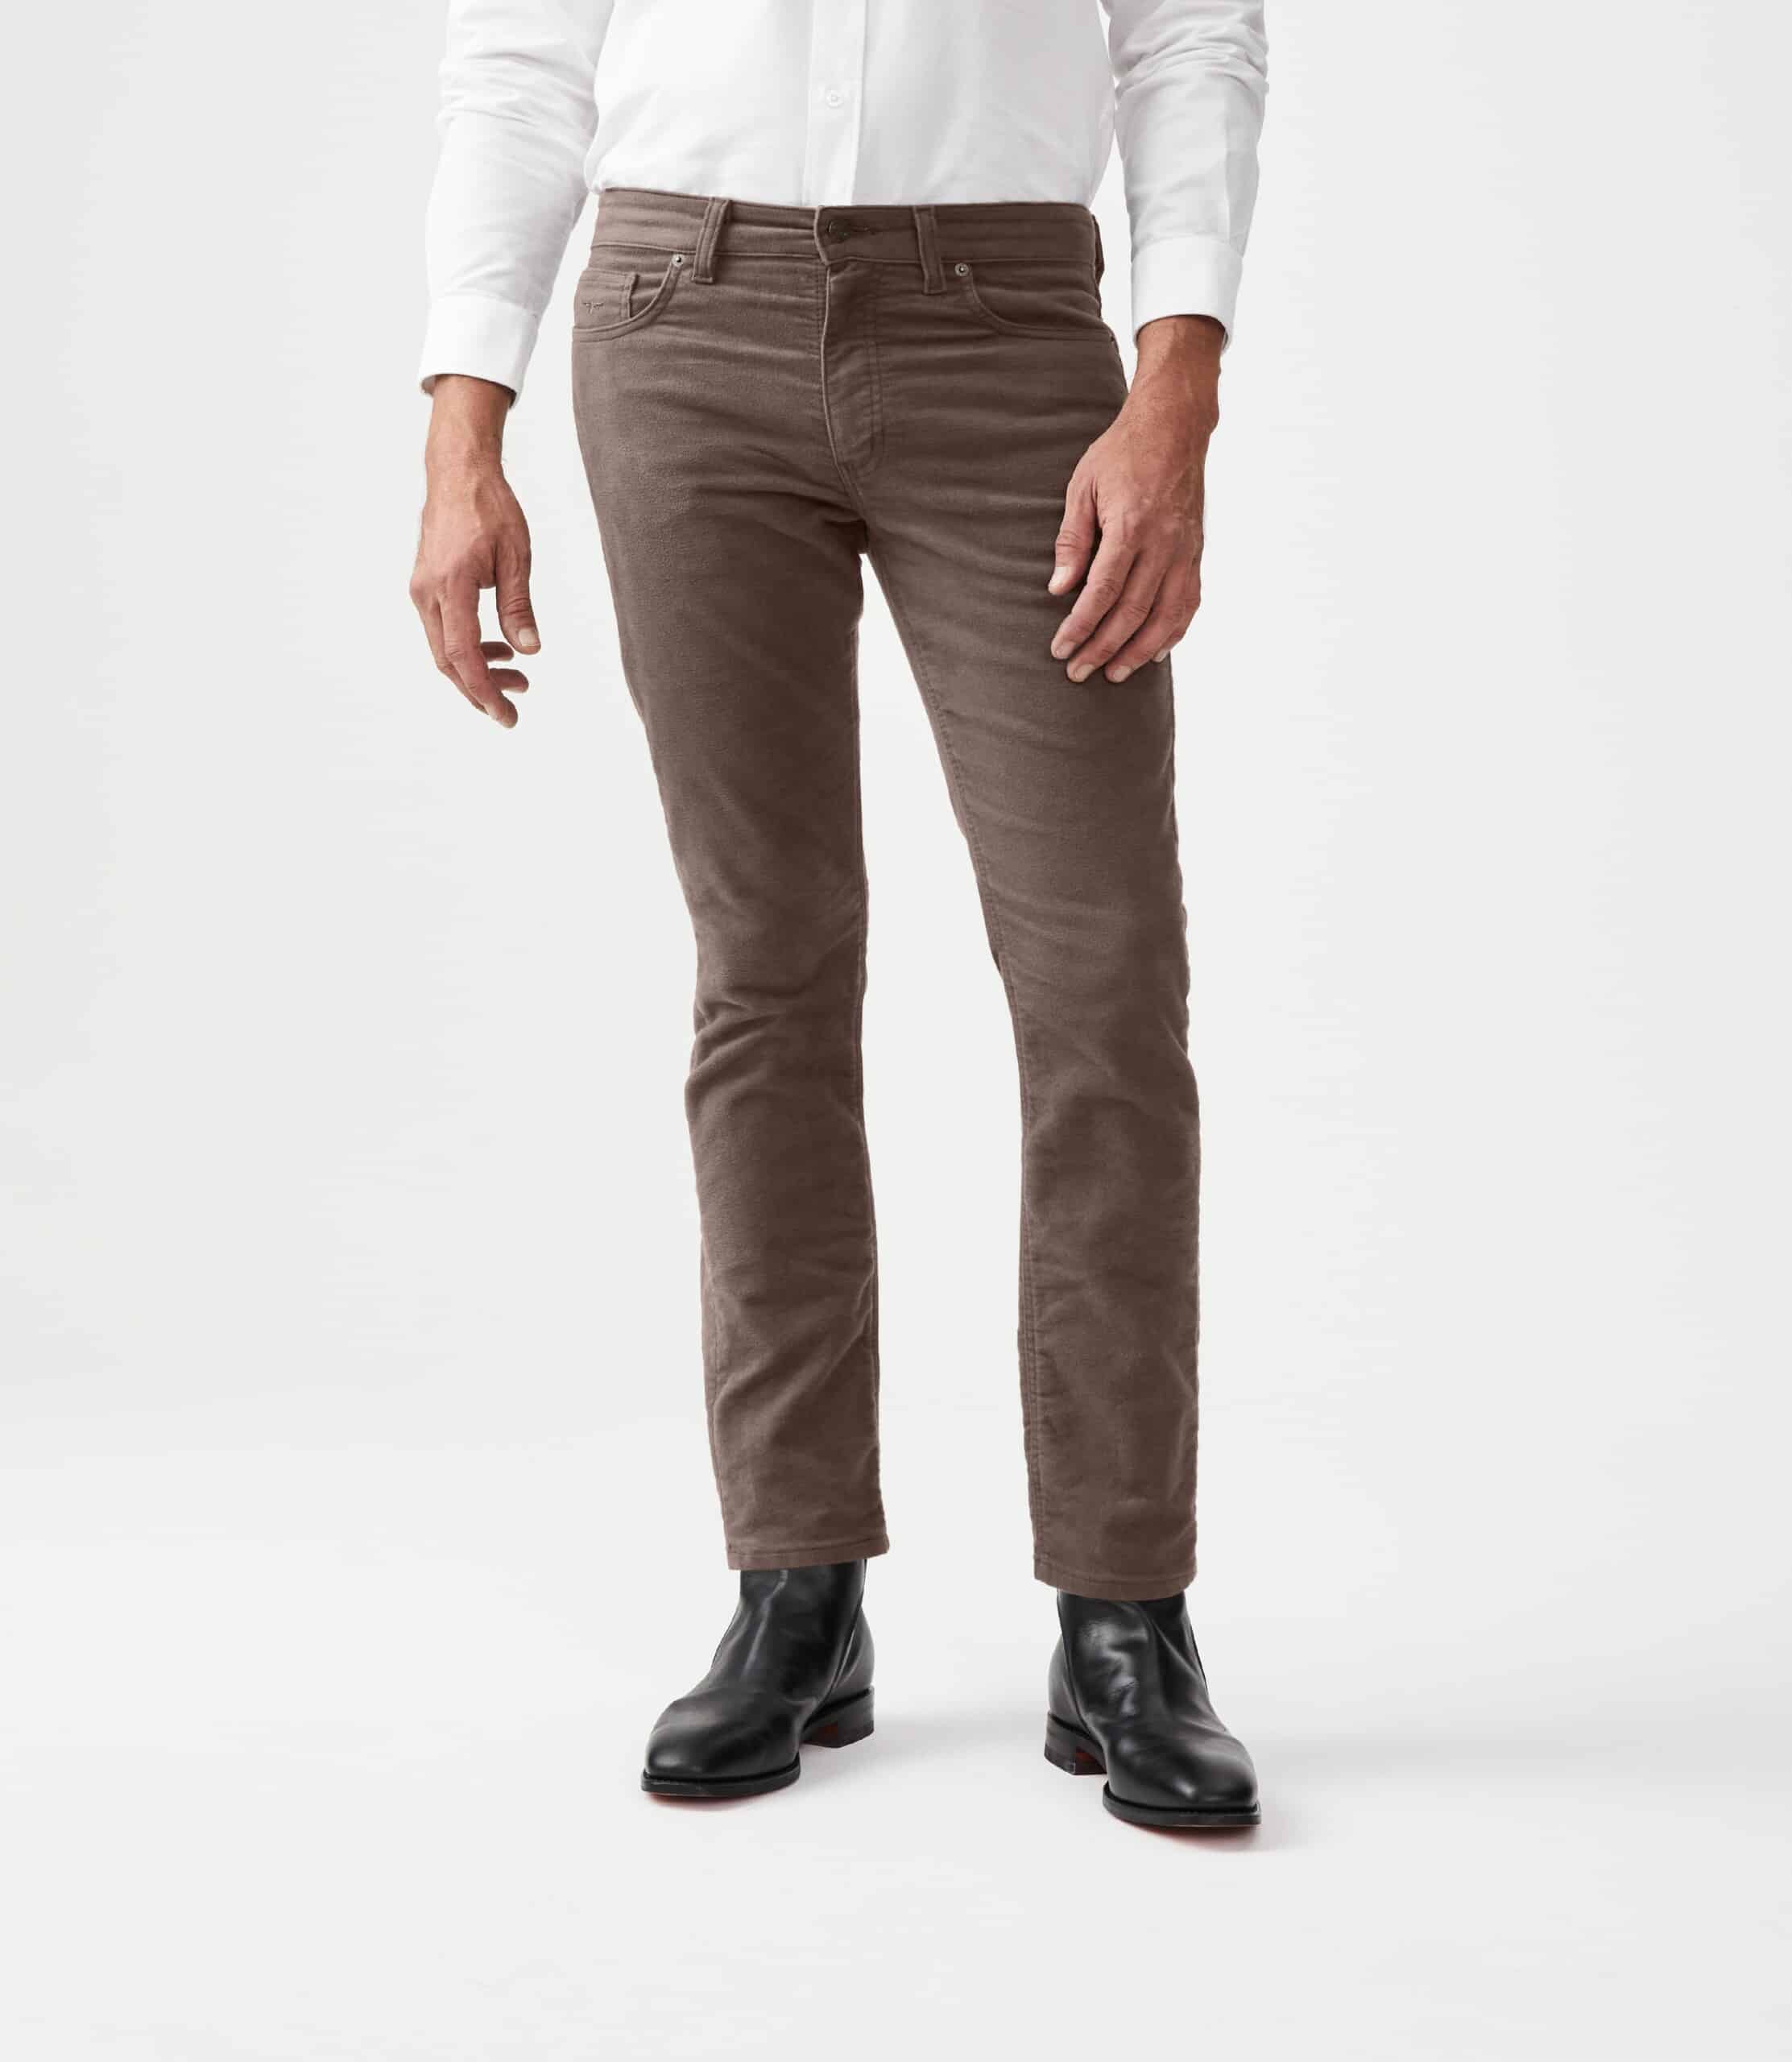 Ramco Moleskin Trousers in Taupe